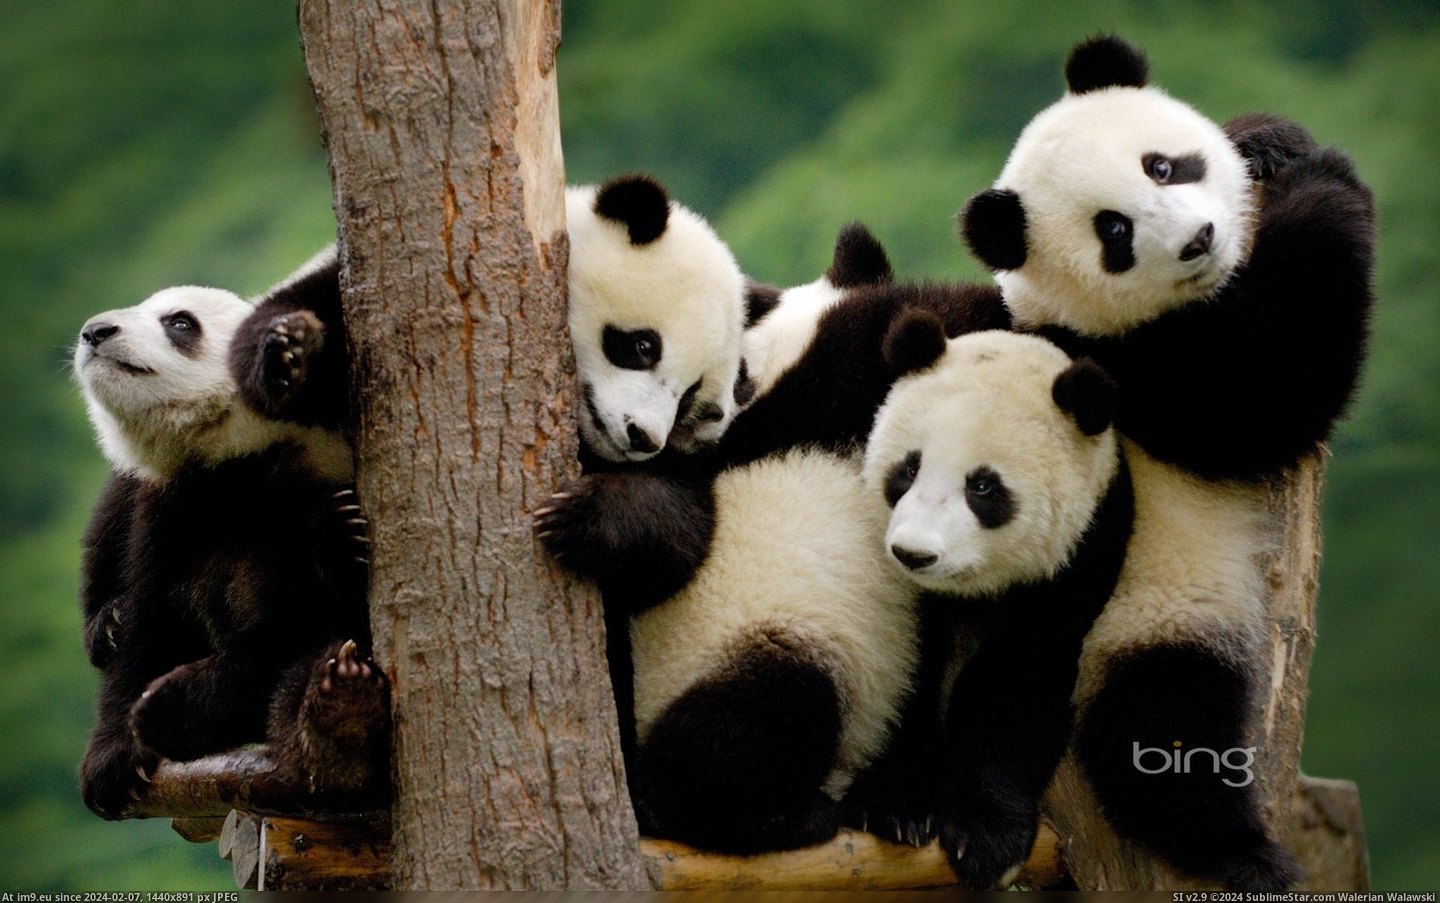 Giant panda cubs at the Wolong National Nature Reserve in Sichuan Province, China (Bing) 2013-03-11 (in Best photos of March 2013)